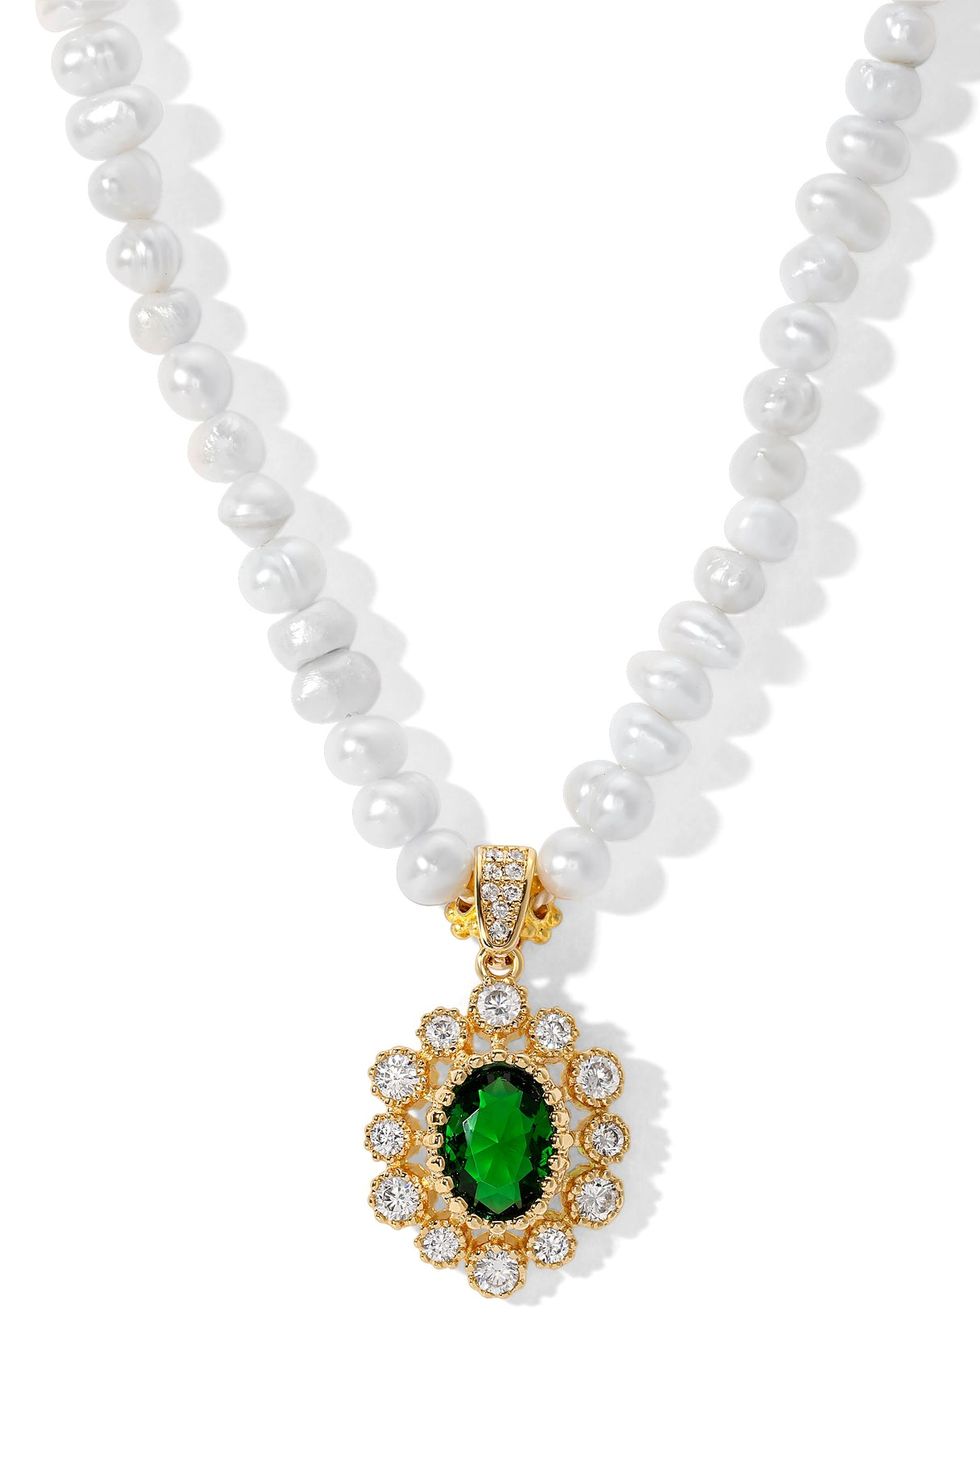 The Amelia Pearl Necklace